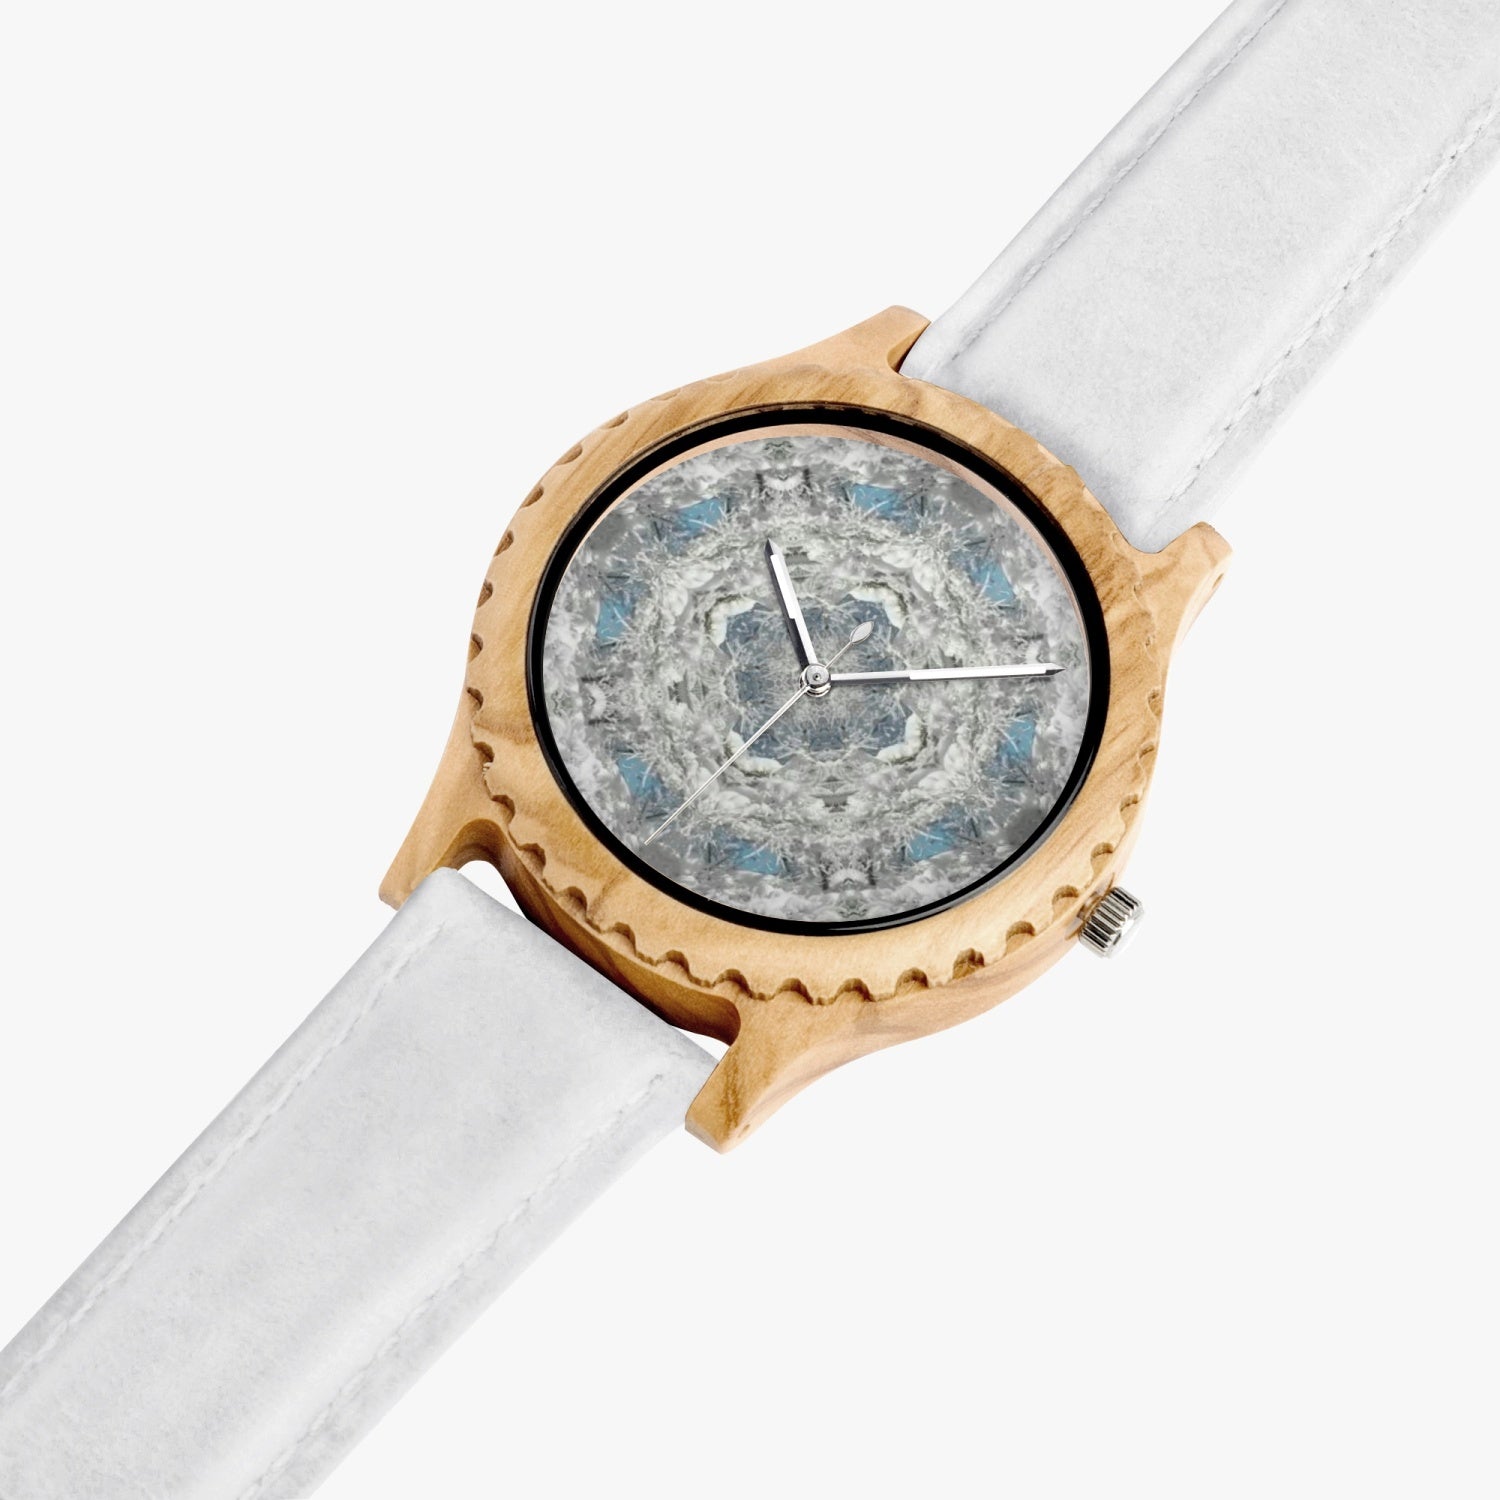 Snow Cristal Italian Olive Lumber Wooden Watch - Leather Strap, by Sensus Studio Design